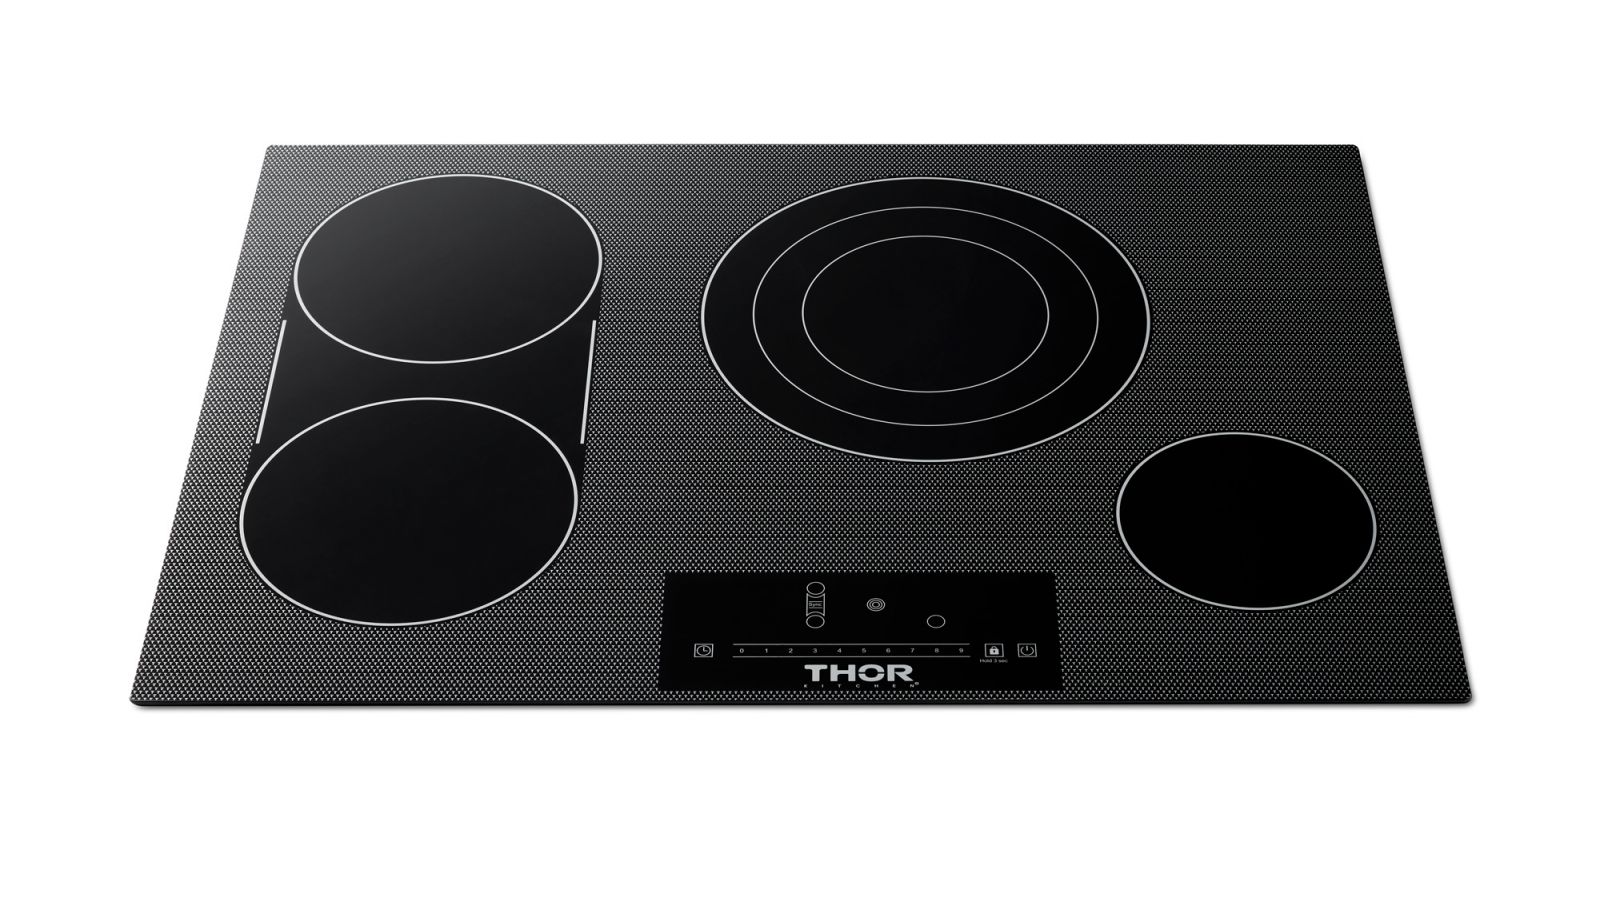 Professional Electric Cooktops